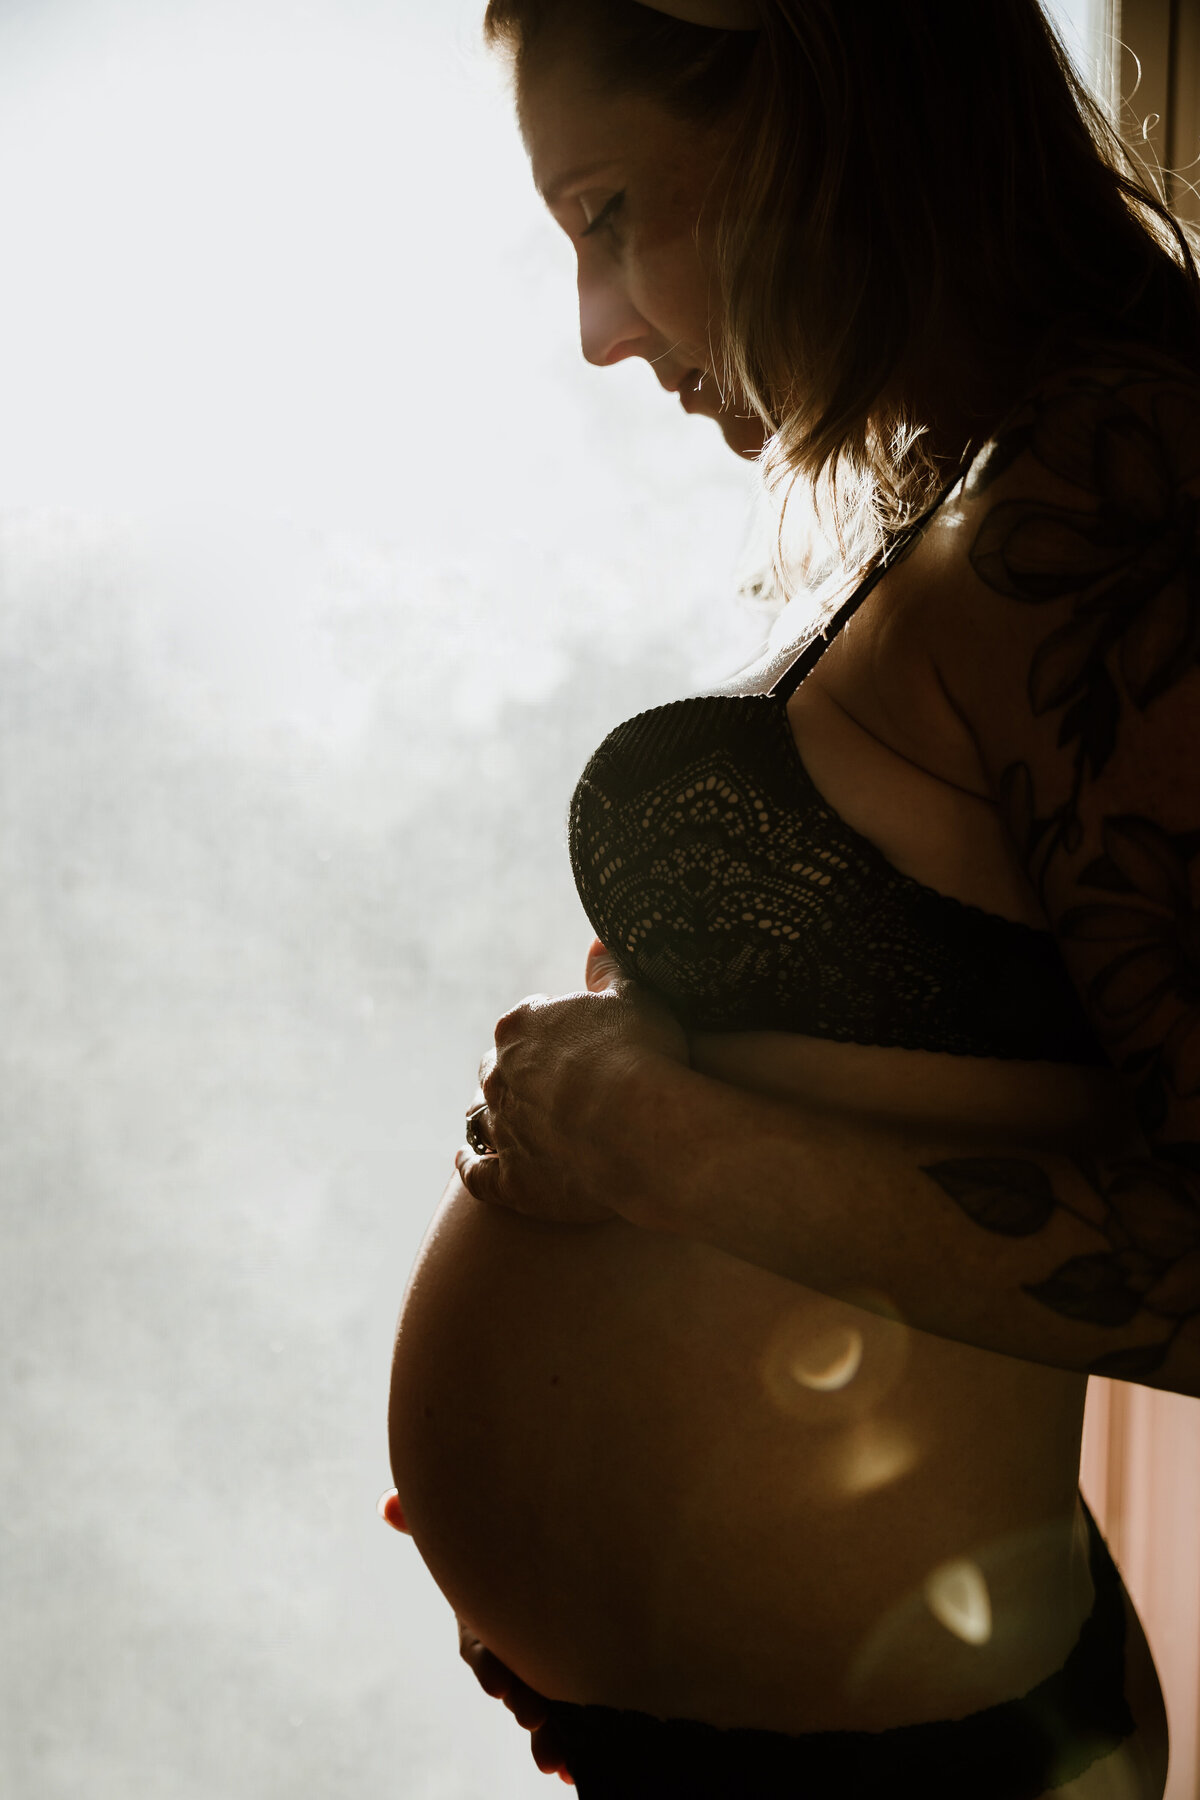 Silhouette of pregnant woman's body